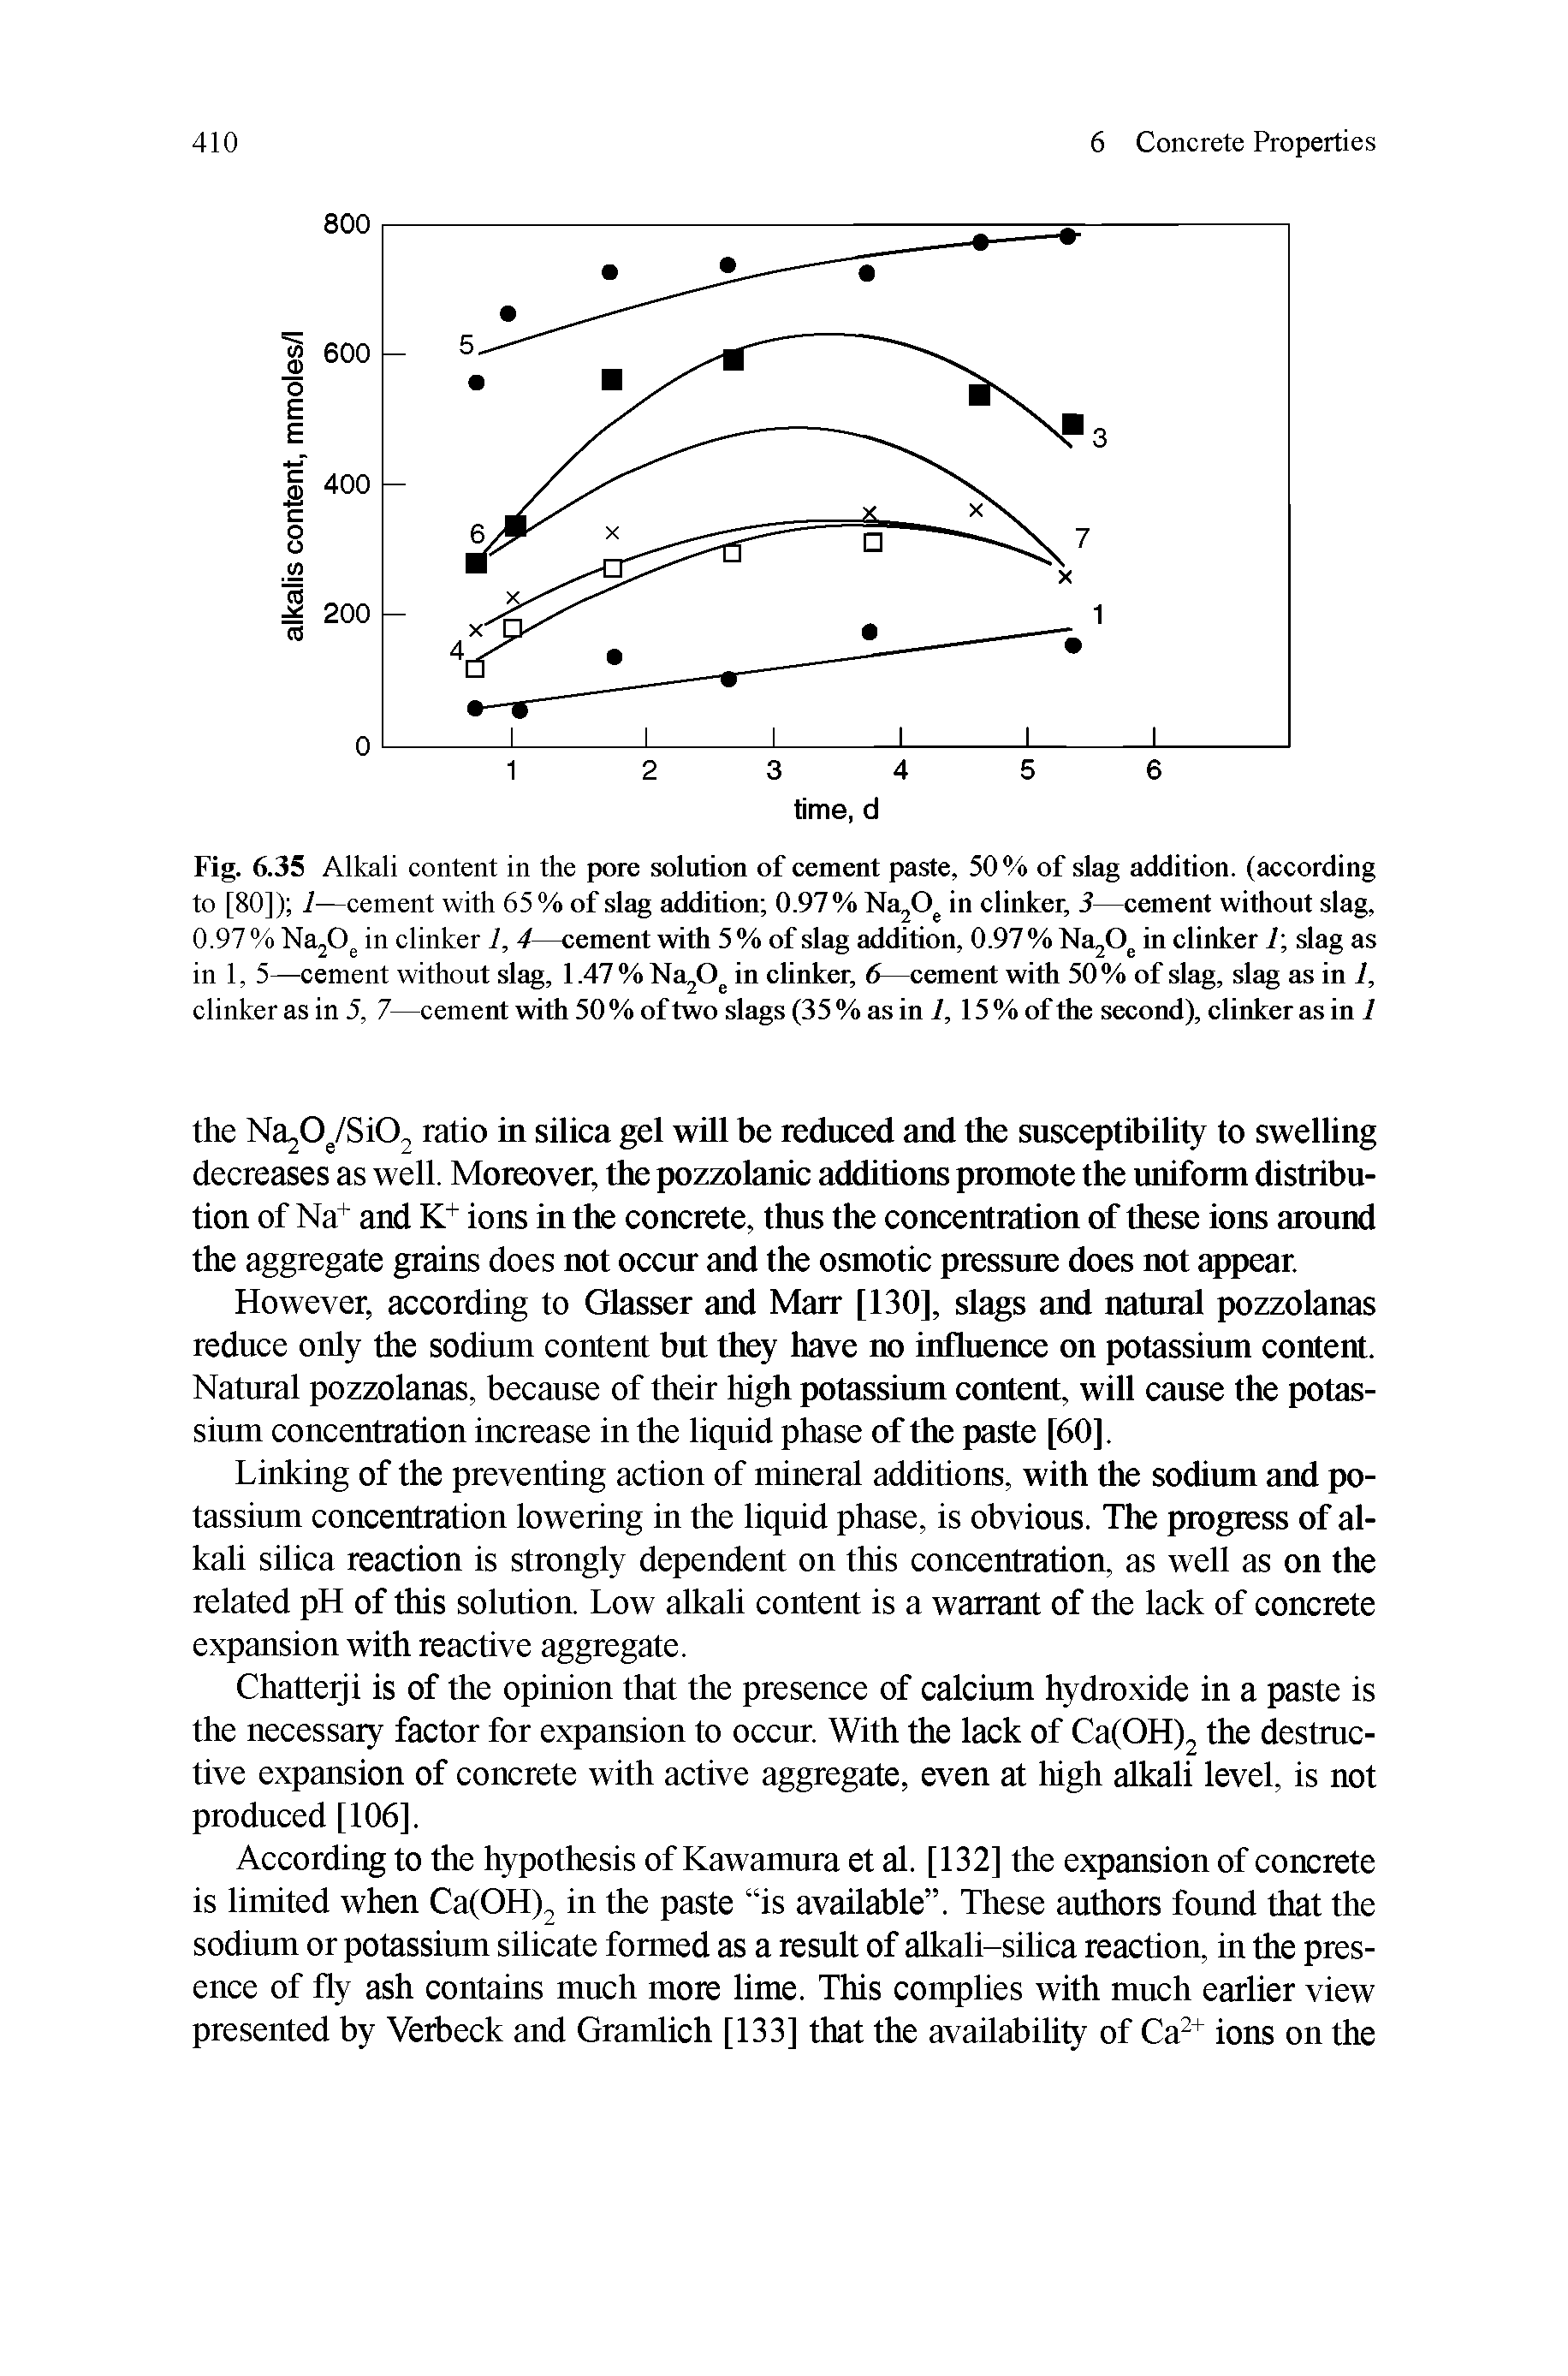 Fig. 6.35 Alkali content in the pore solution of cement paste, 50% of slag addition, (according to [80]) 1—cement with 65 % of slag addition 0.97 % Na O in clinker, 3 eement without slag, 0.97 % NajO, in clinker 1,4 cement with 5 % of slag addition, 0.97 % Na O. in clinker 7 slag as in 1, 5—cement without slag, 1.47 % Na O. in cUnker, 6 cement with 50 % of slag, slag as in 1, clinker as in 5, 7—cement with 50 % of two slags (35 % as in 7,15 % of the seeond), elinker as in 7...